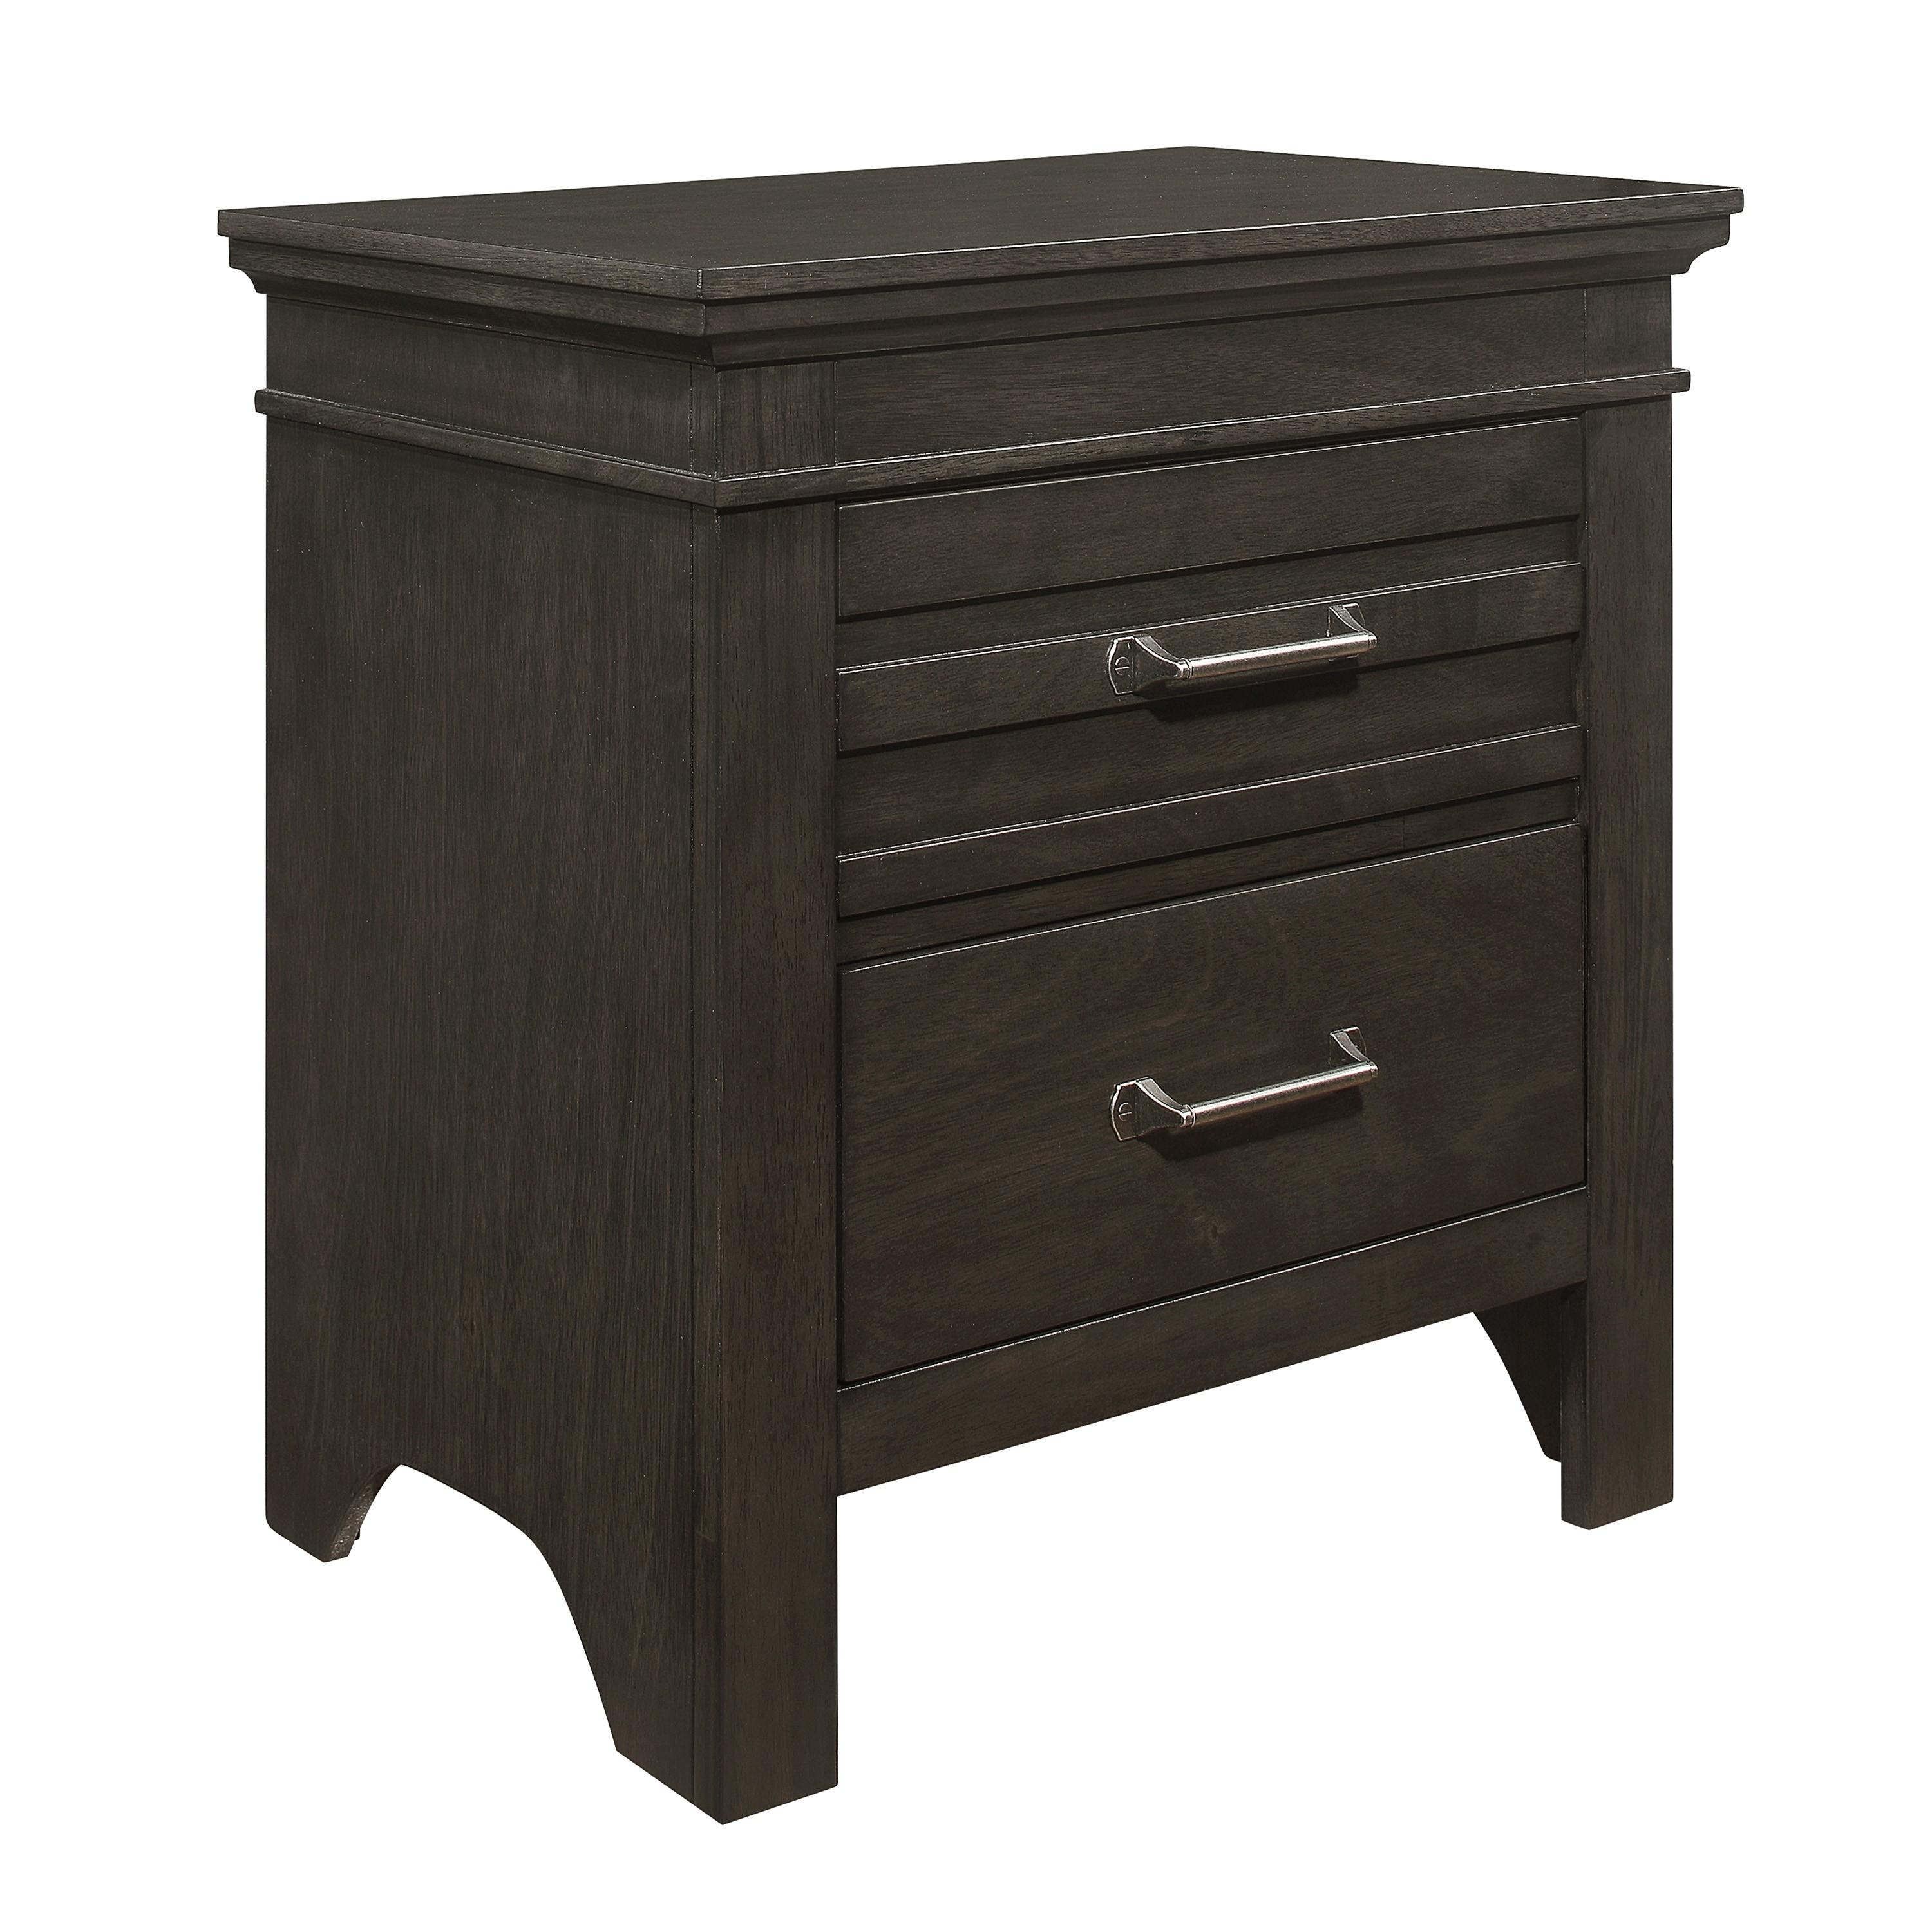 Transitional Nightstand 1675-4 Blaire Farm 1675-4 in Charcoal 